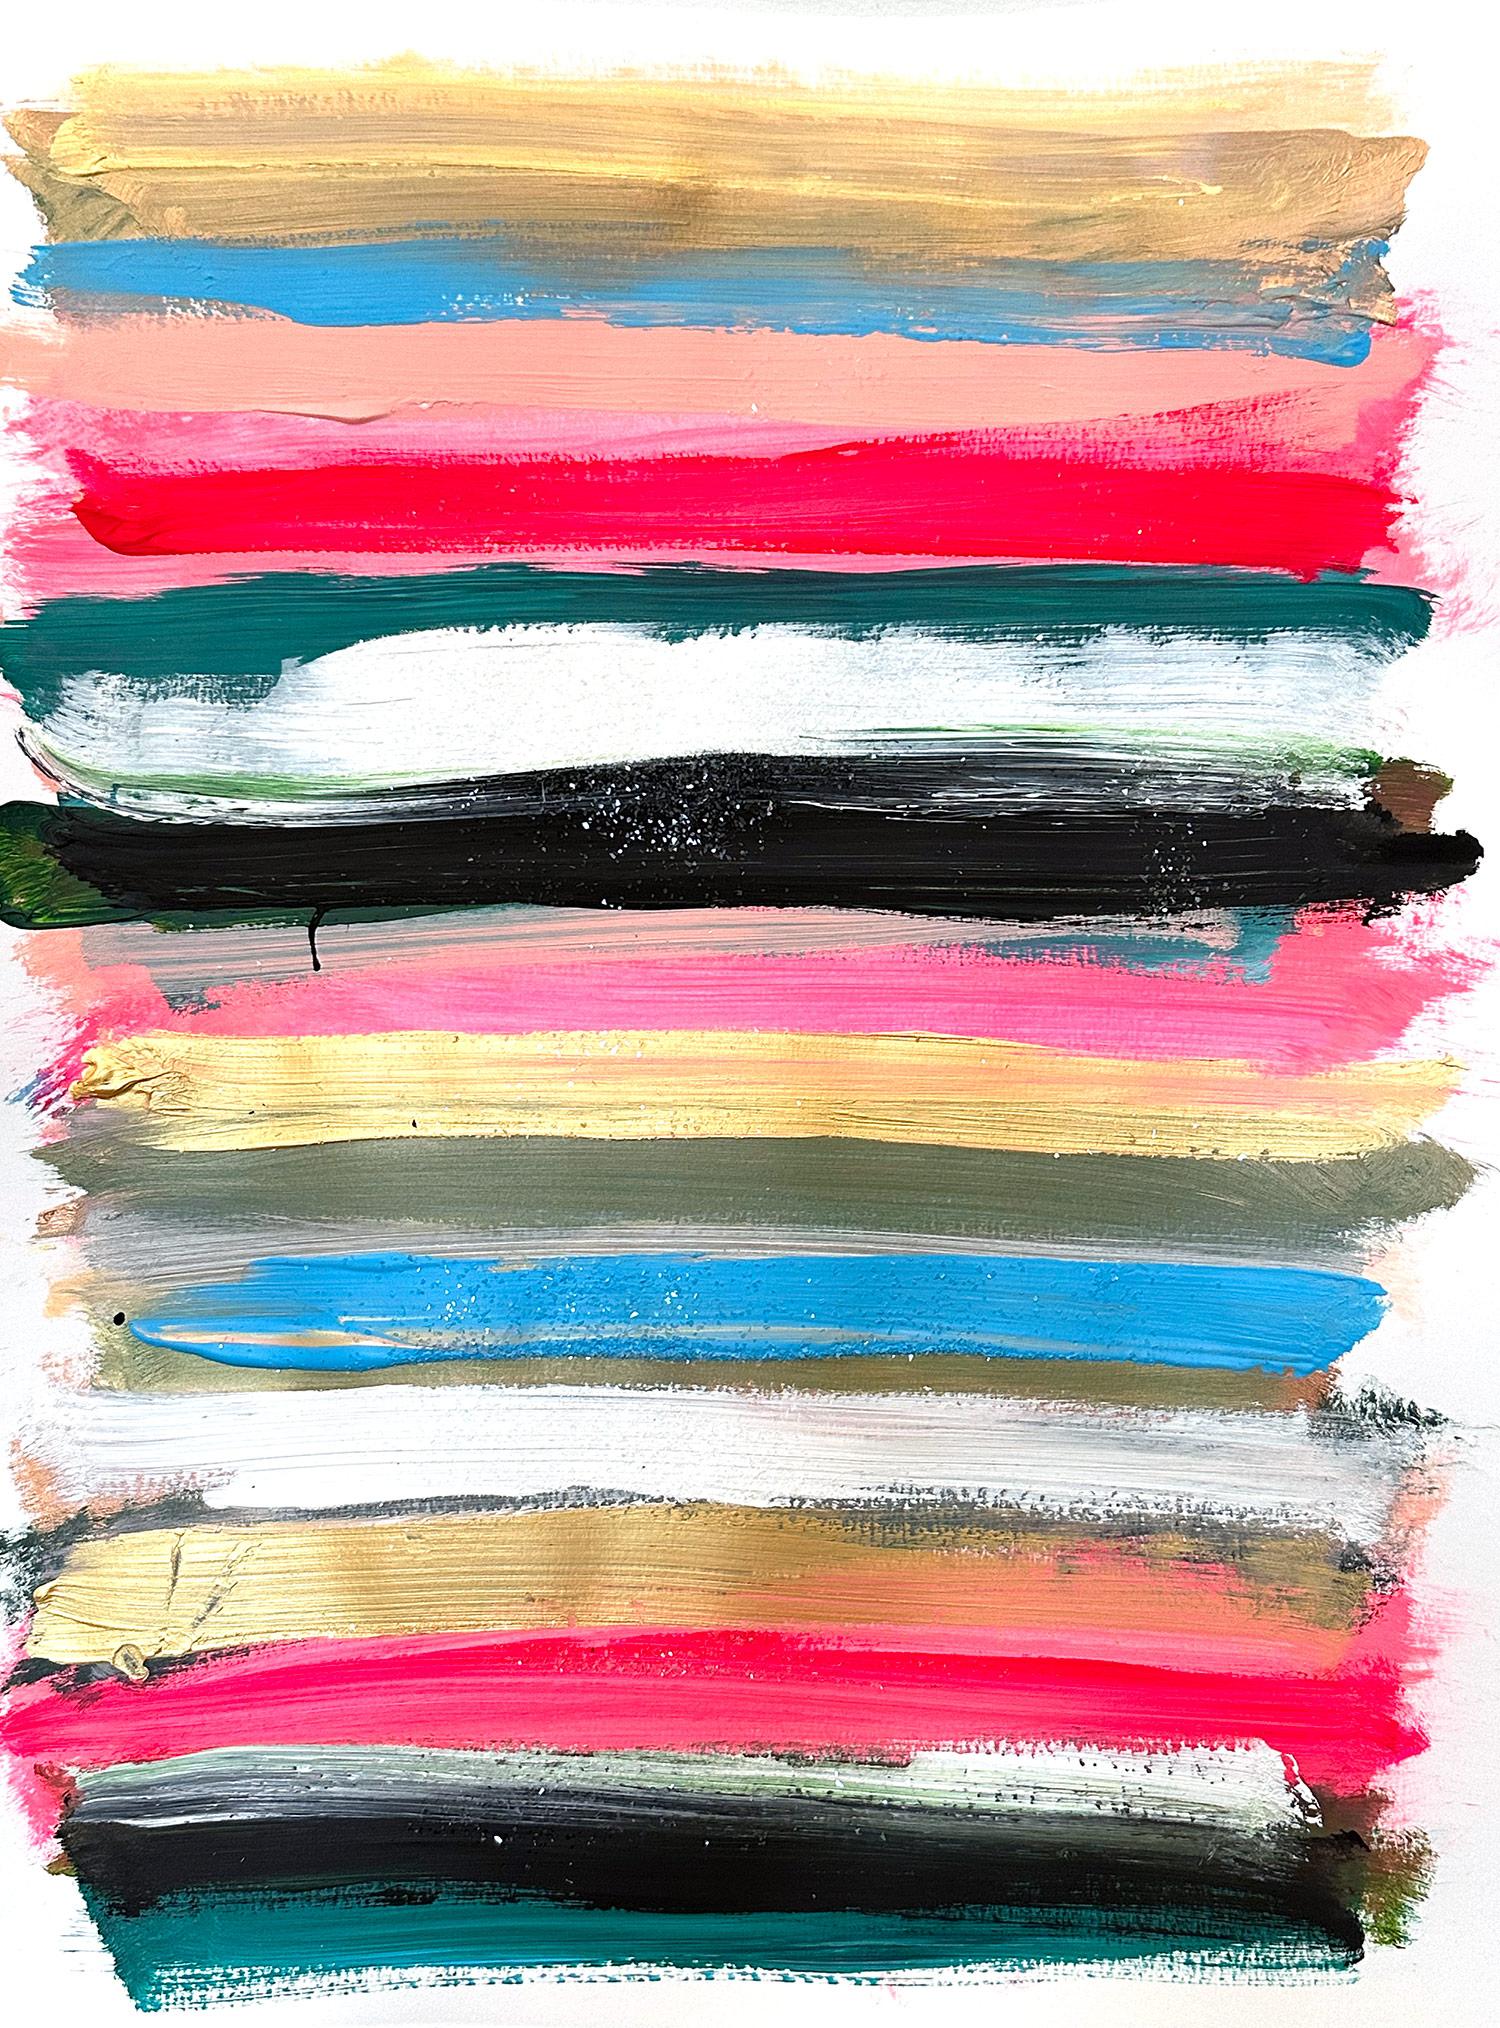 Cindy Shaoul Abstract Painting - "My Horizon - Hamptons Cocktail Party" Color Field Contemporary Painting Paper